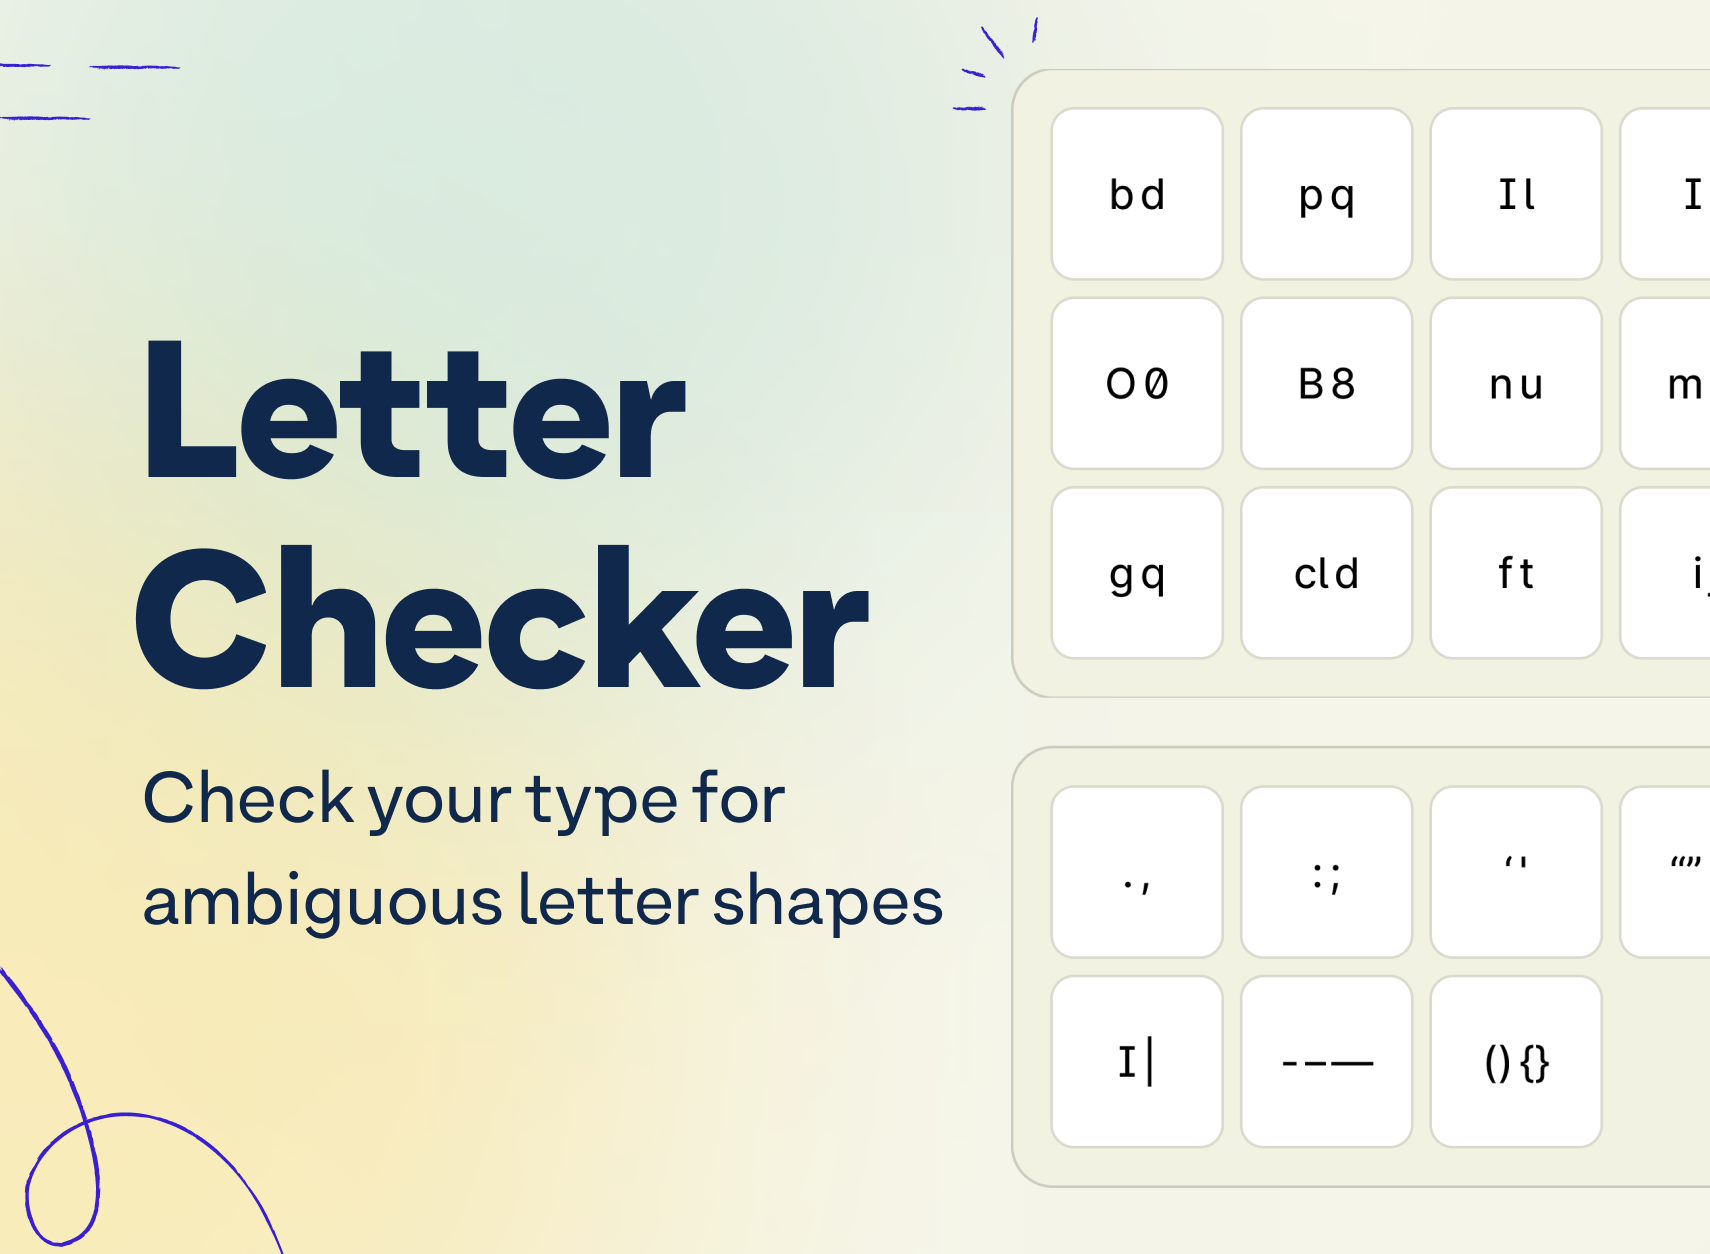 Letter Checker. Check your type for ambiguous letter shapes. A grid of pairs of characters compares similar letter and number shapes. Each pair is contained within its own box, and examples include 'bd,' 'pq,' 'Il,' and more.